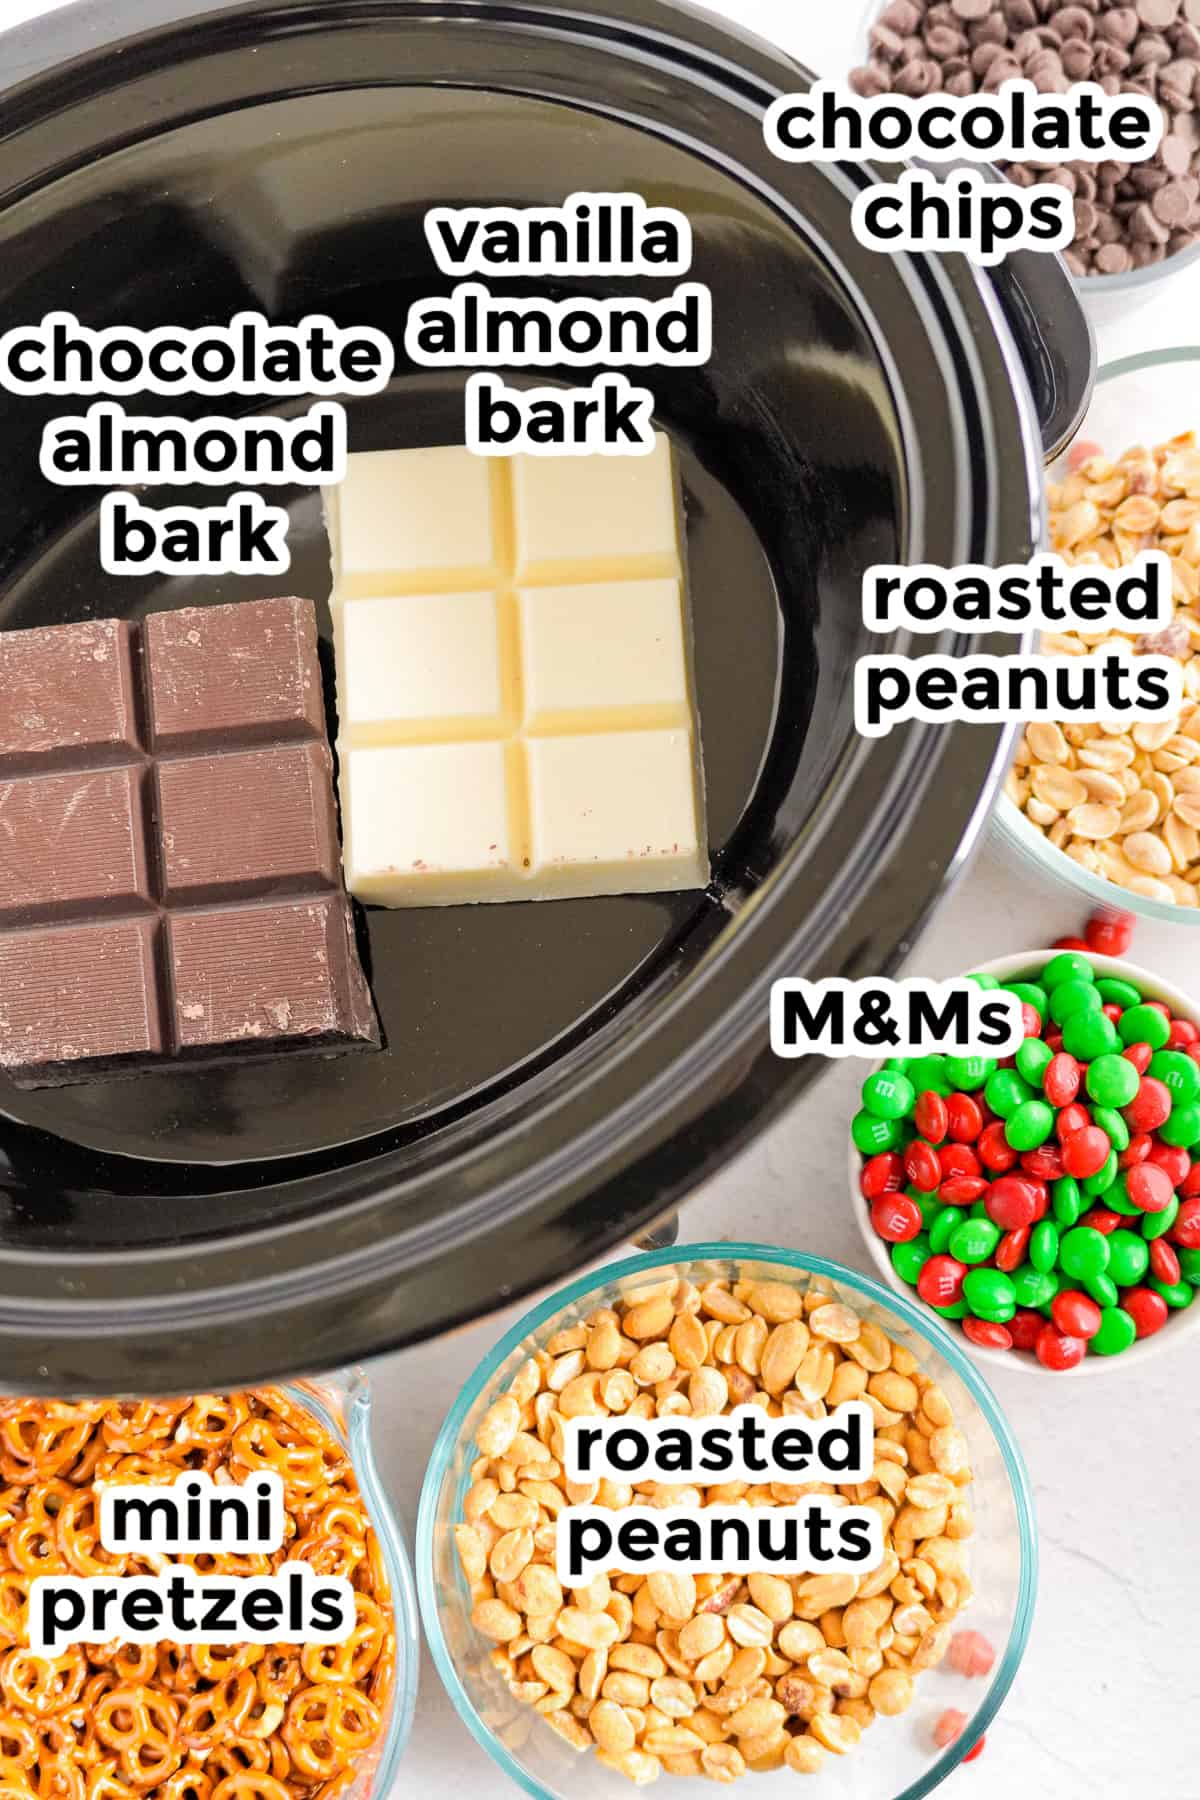 Ingredients for crockpot candy in bowls next to a crockpot filled with vanilla and chocolate almond bard with title text labels.